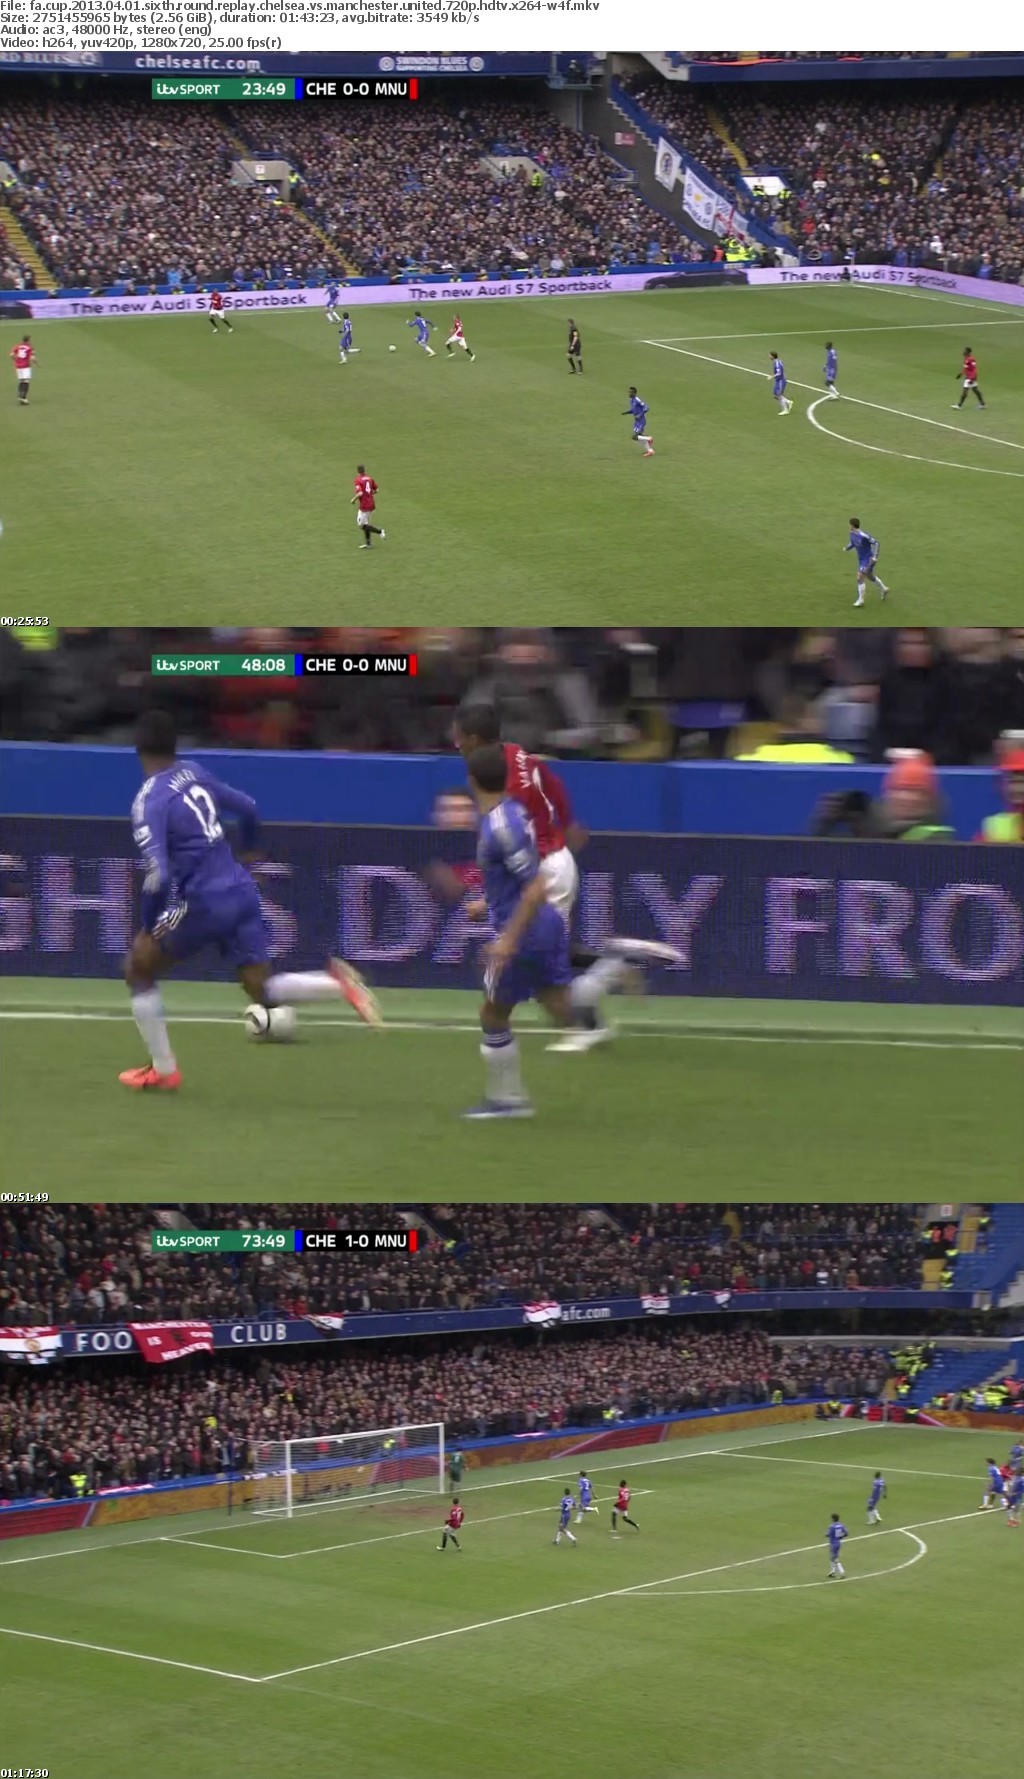 FA Cup 2013 04 01 Sixth Round Replay Chelsea Vs Manchester United 720p HDTV x264 W4F